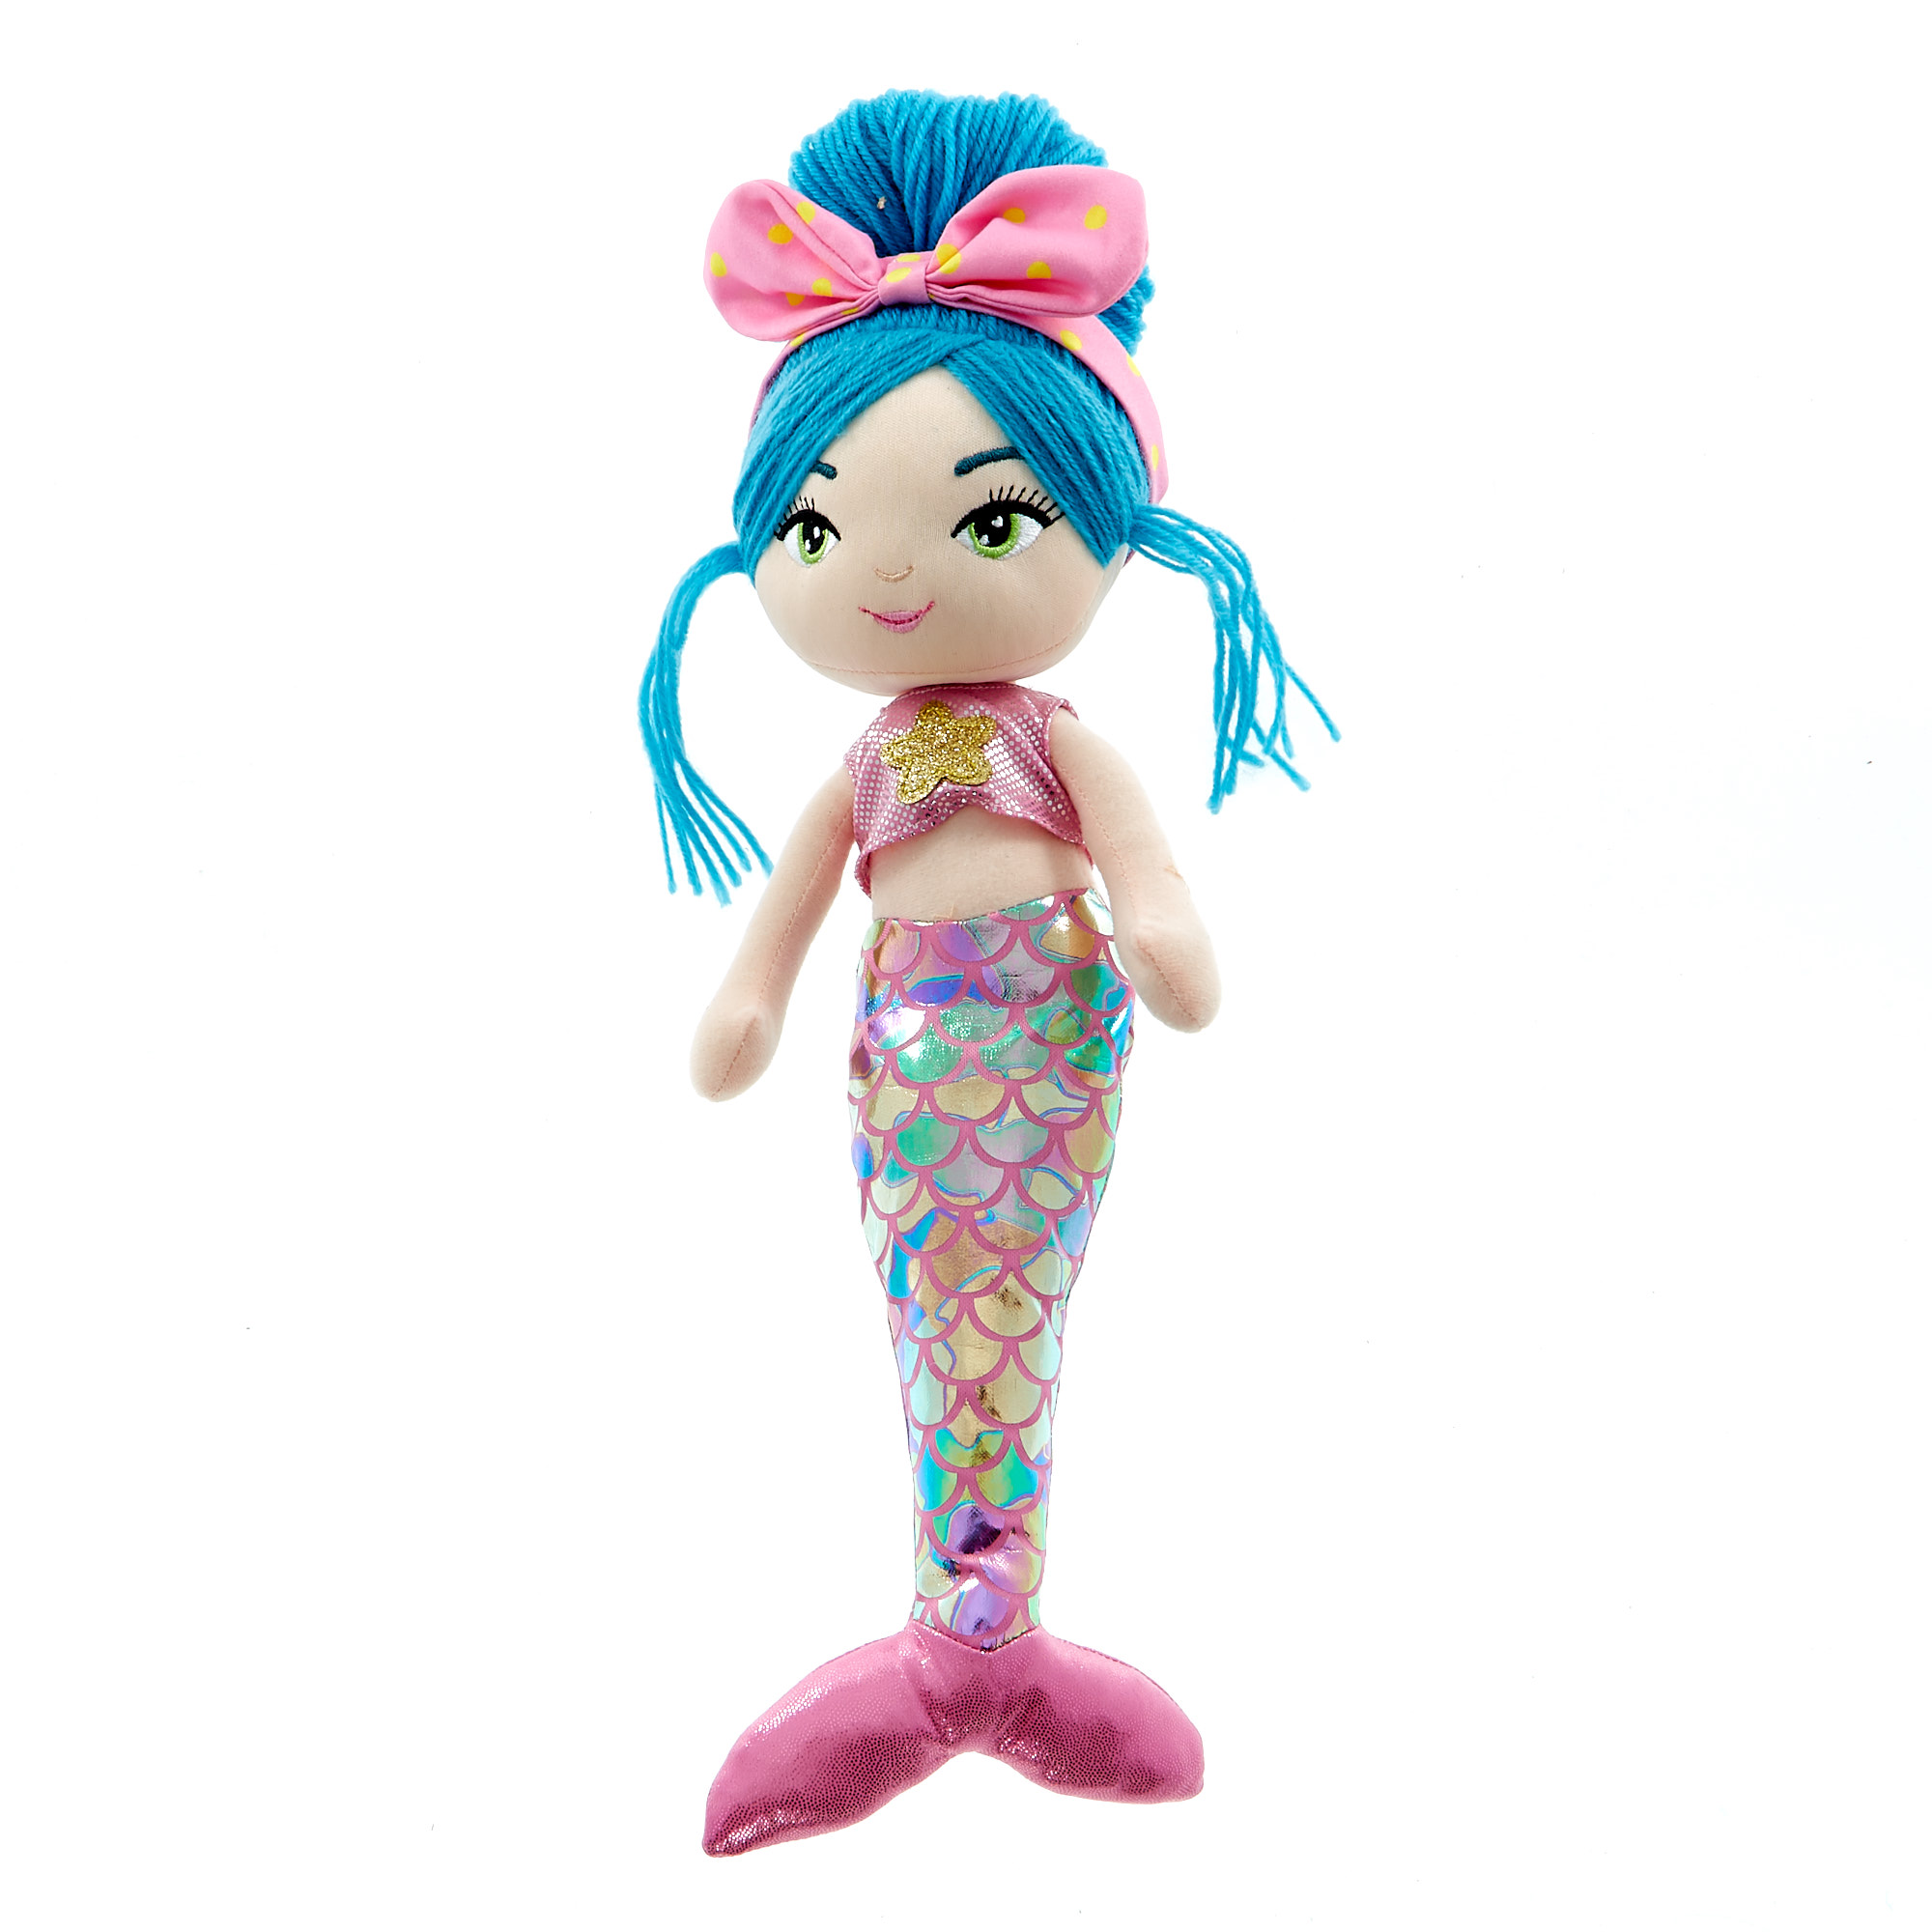 Hey Girl! Coral Merbabe Soft Toy Doll